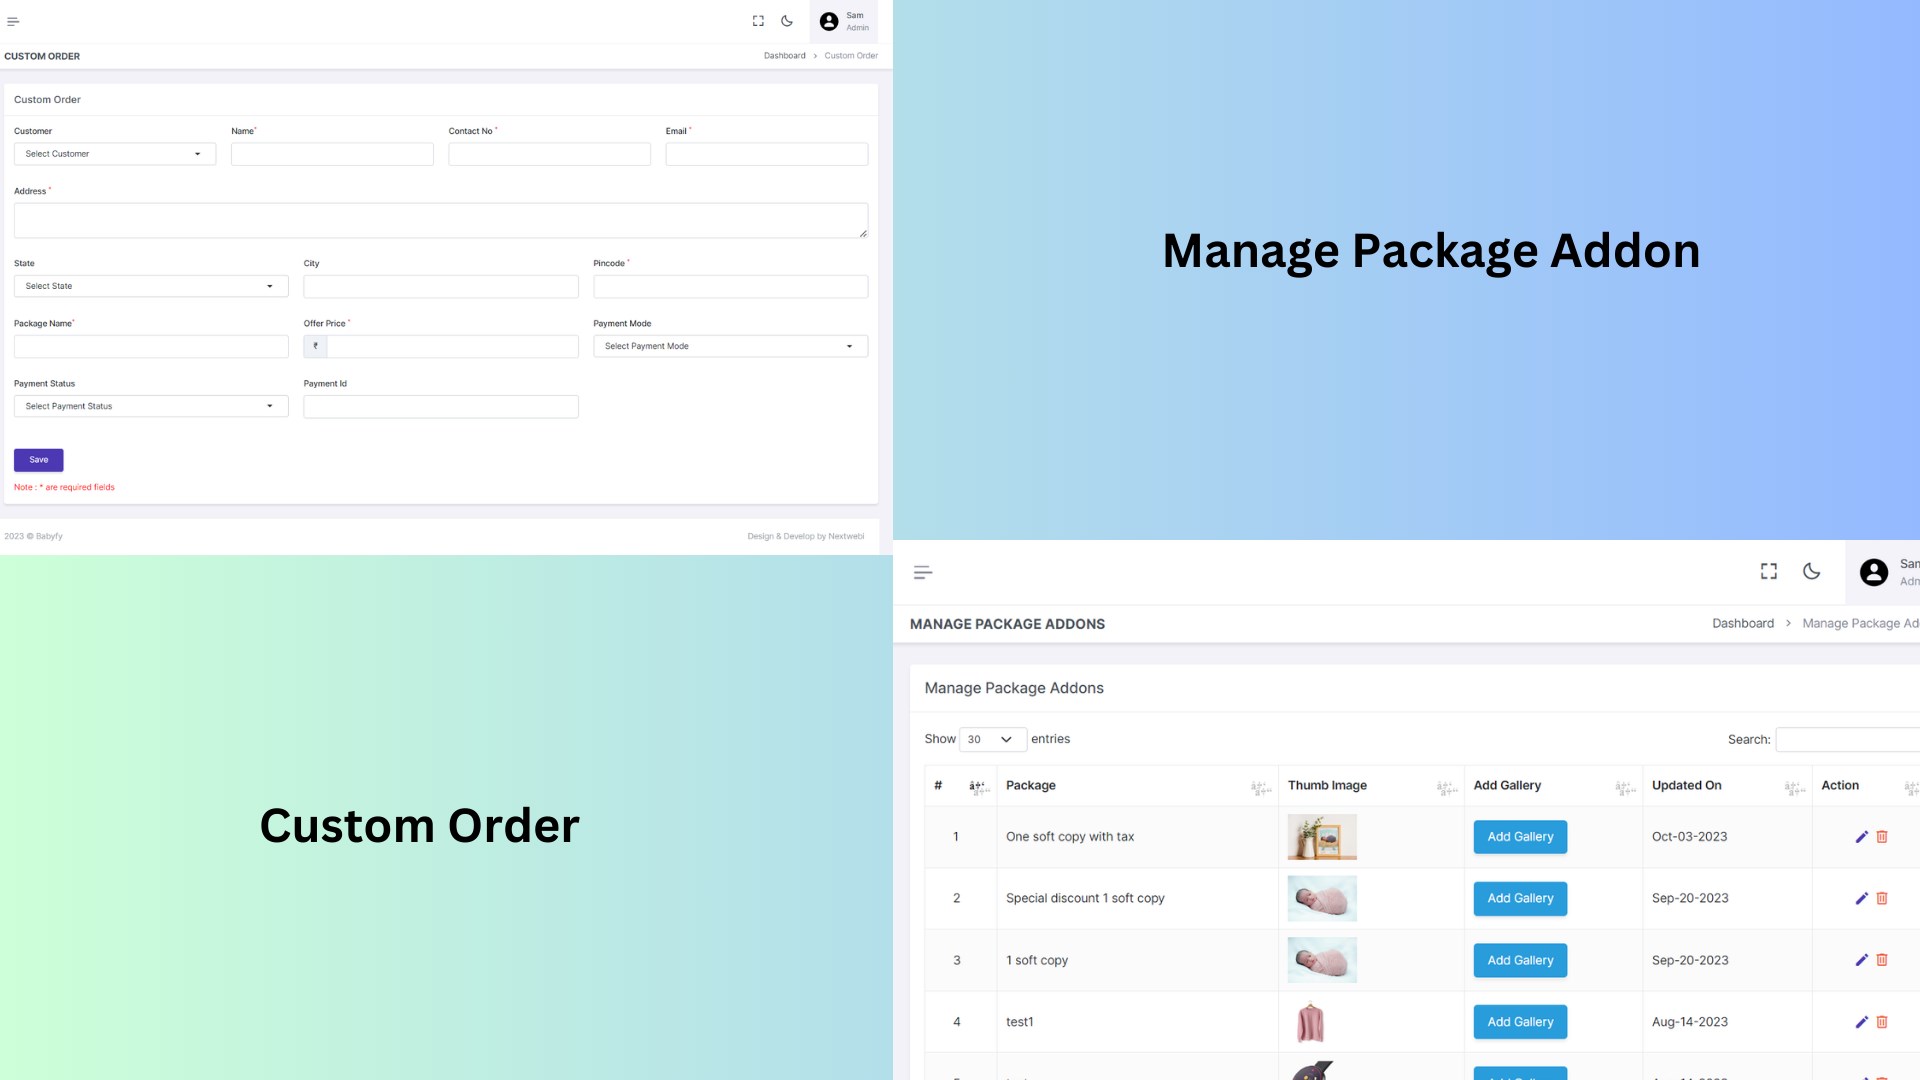 Feature that empowers admins to create custom orders, offering flexibility to meet users